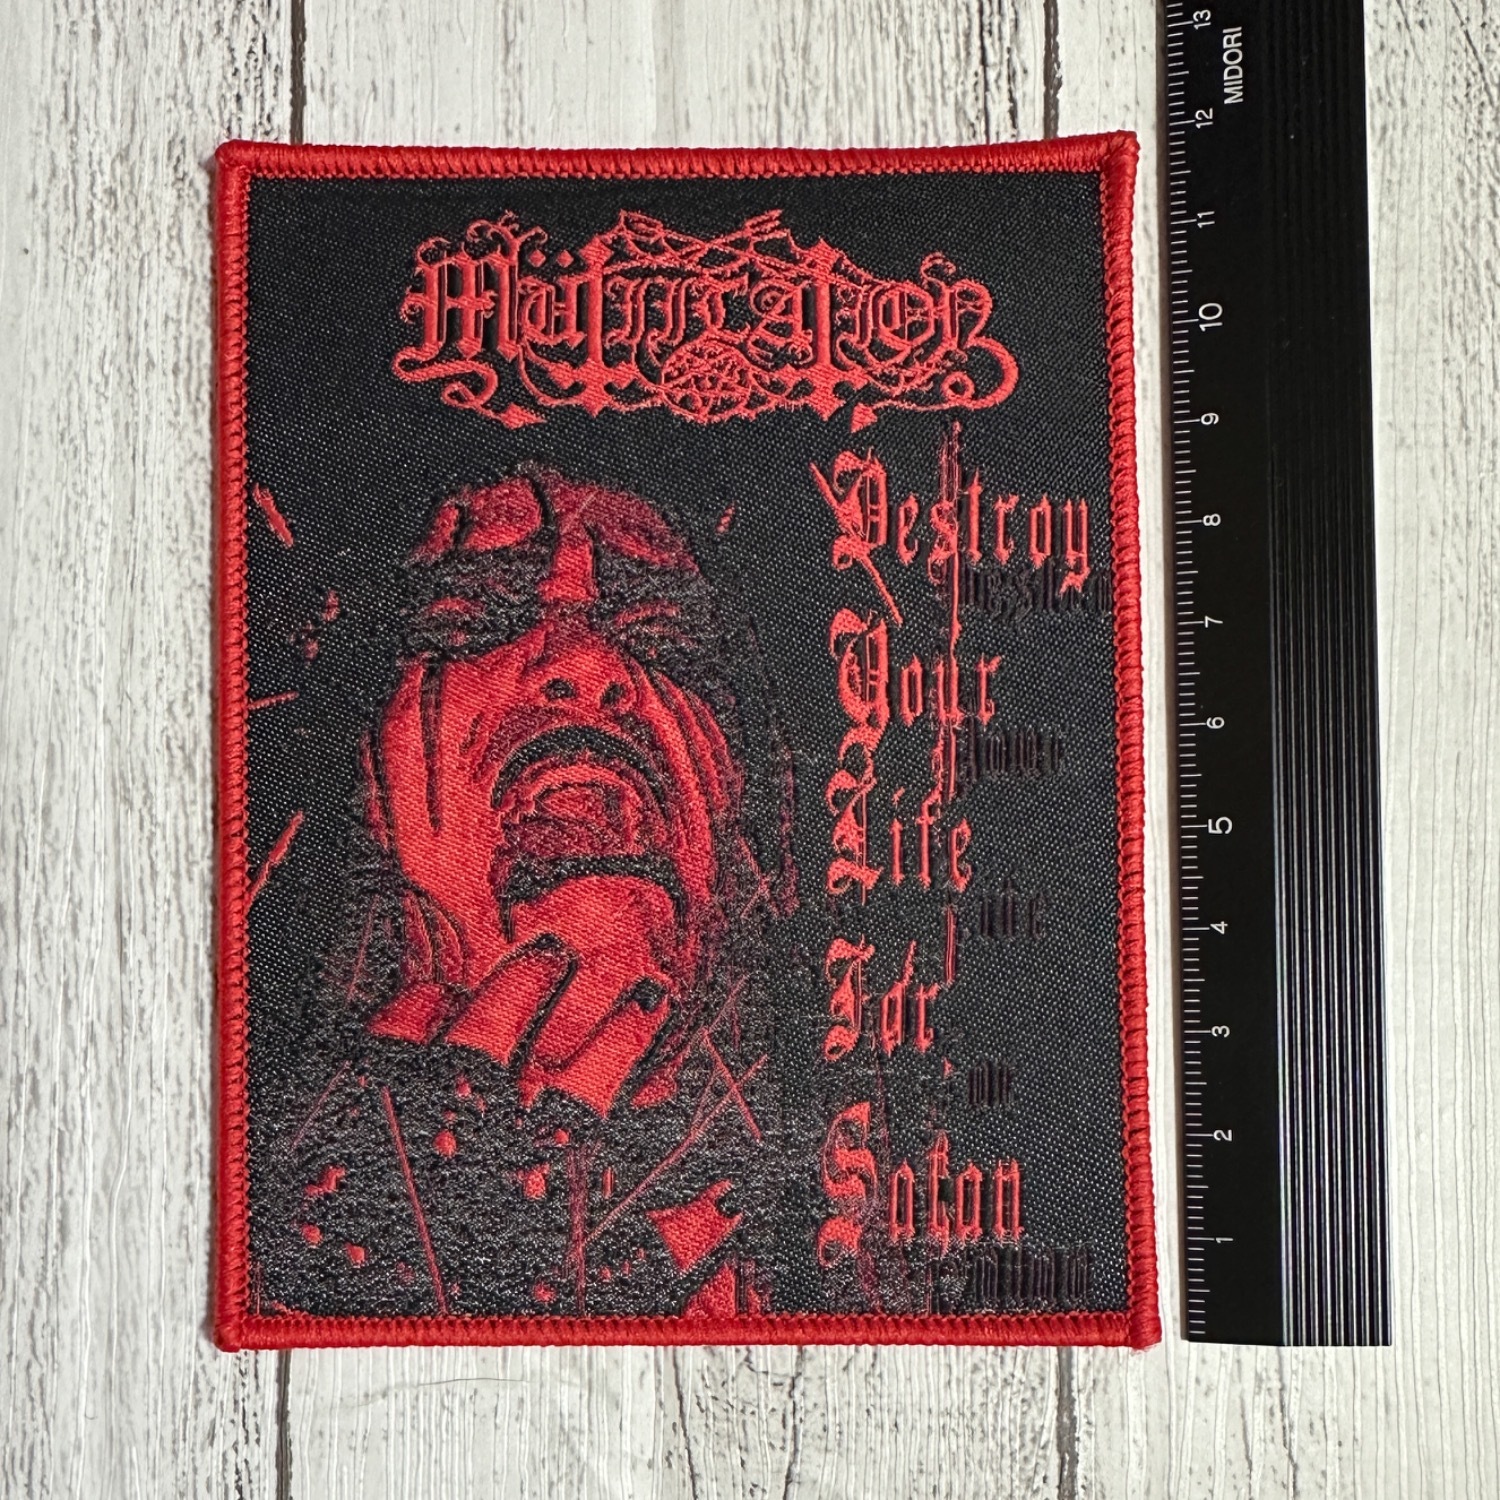 【Patch】 Mutiilation - Destroy your Life for Satan 【Small Patch】